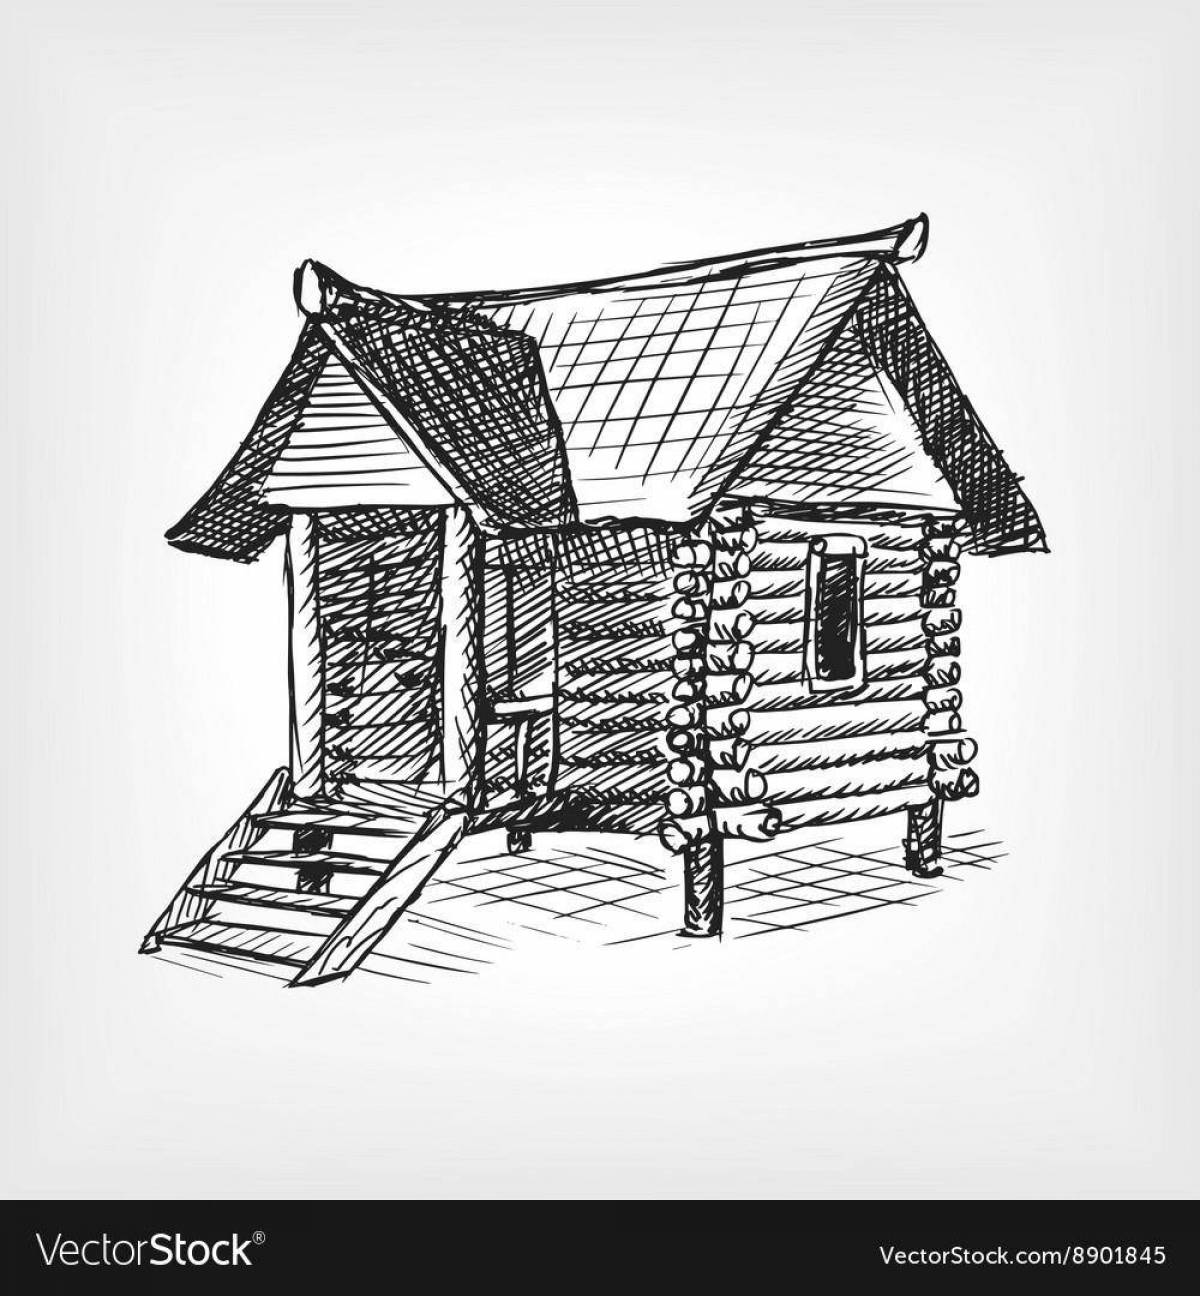 Coloring book playful wooden hut